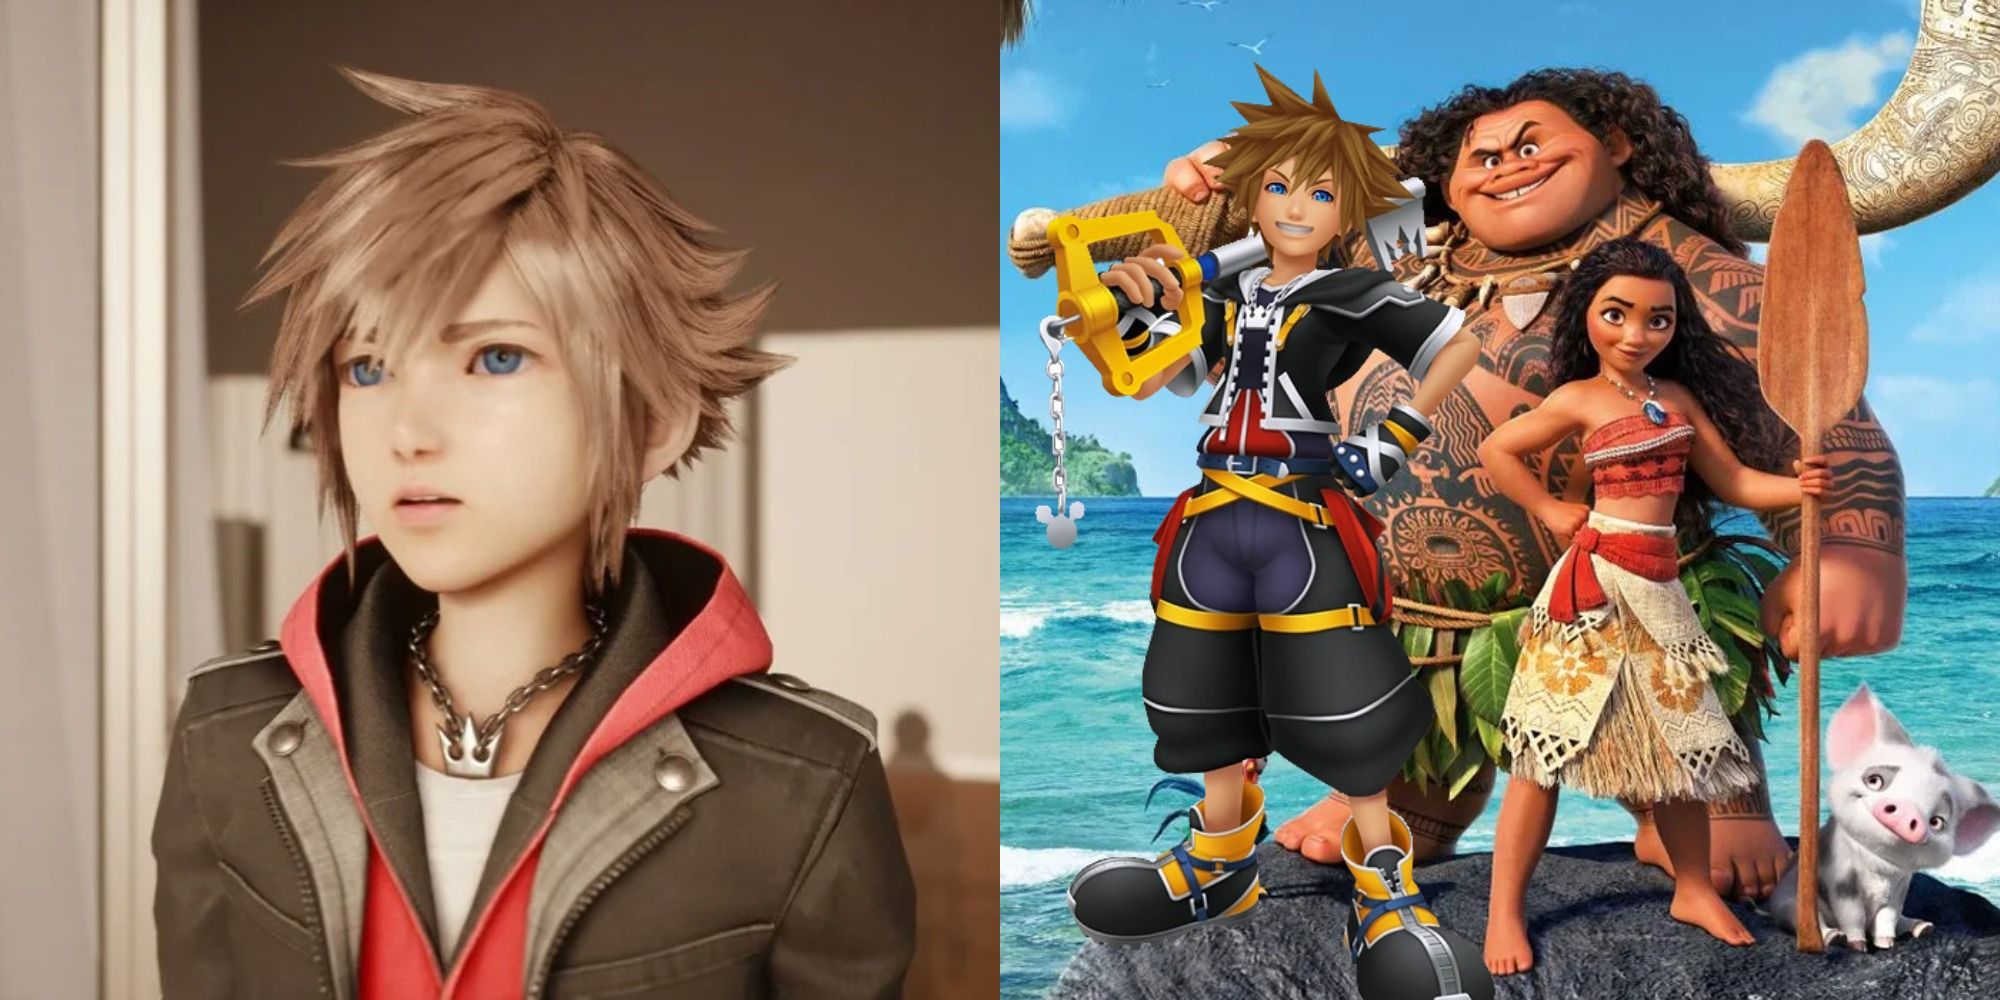 Split image of Sora in KH 4 and a photoshopped image of Sora with Moana and Maui